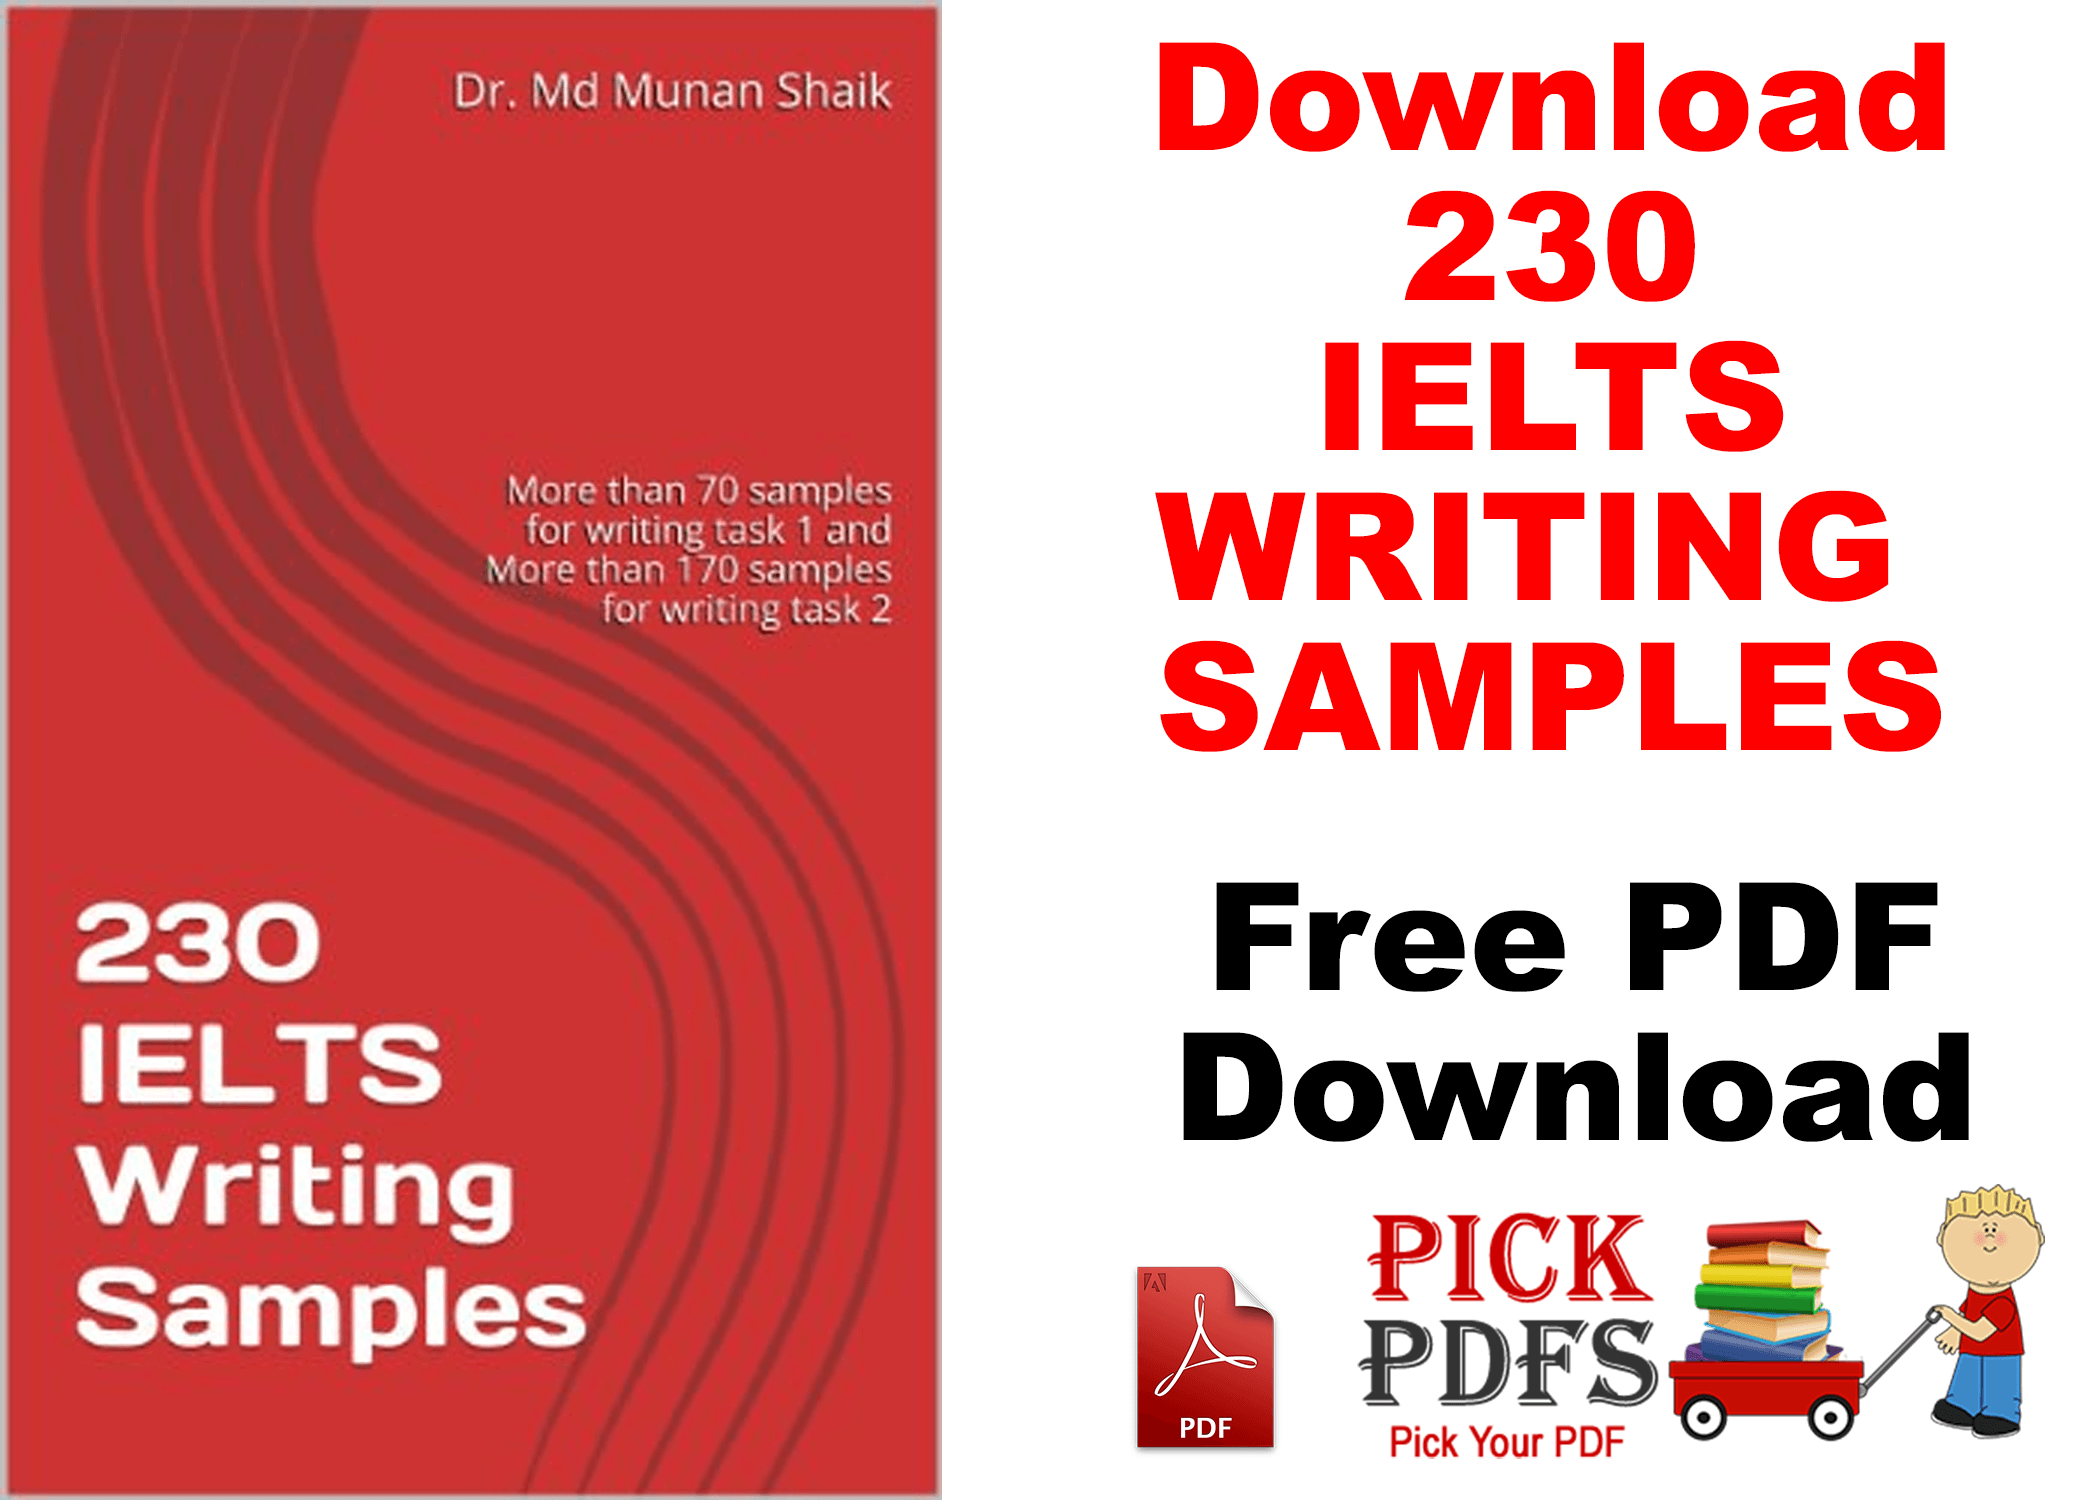 https://pickpdfs.com/check-your-english-vocabulary-for-ielts-essential-words-and-phrases-to-help-you-maximize-your-ielts-score/